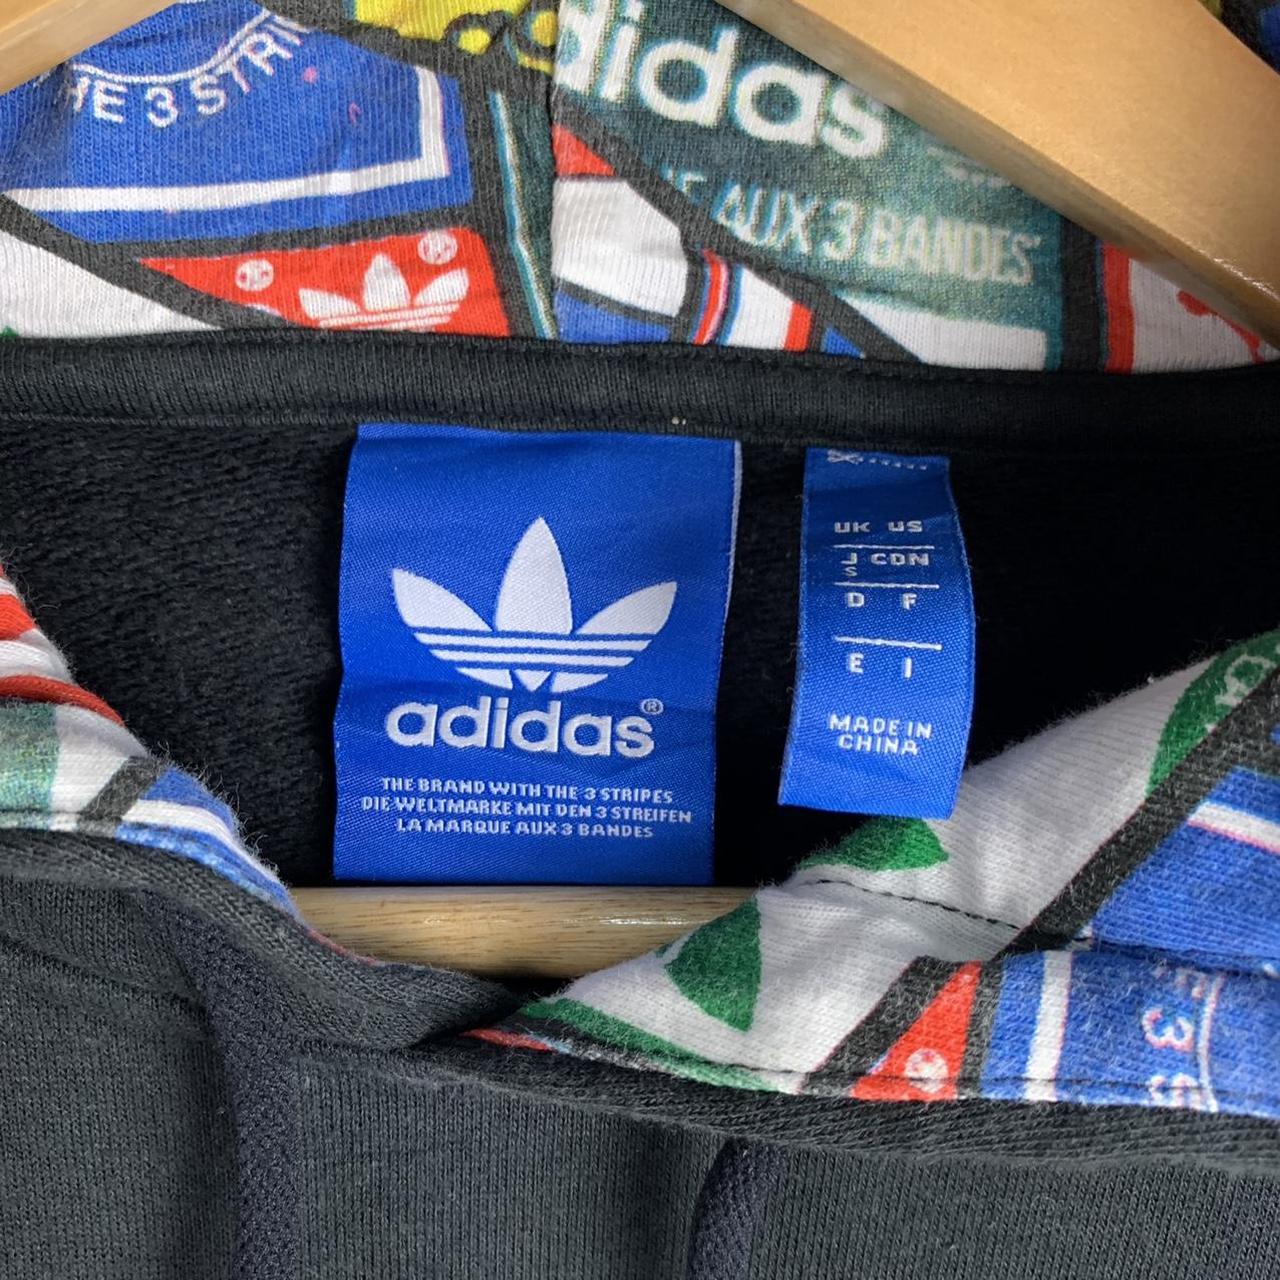 ADIDAS TEXAS RANGERS PULLOVER HOODY X-LARGE BLUE/RED - Depop